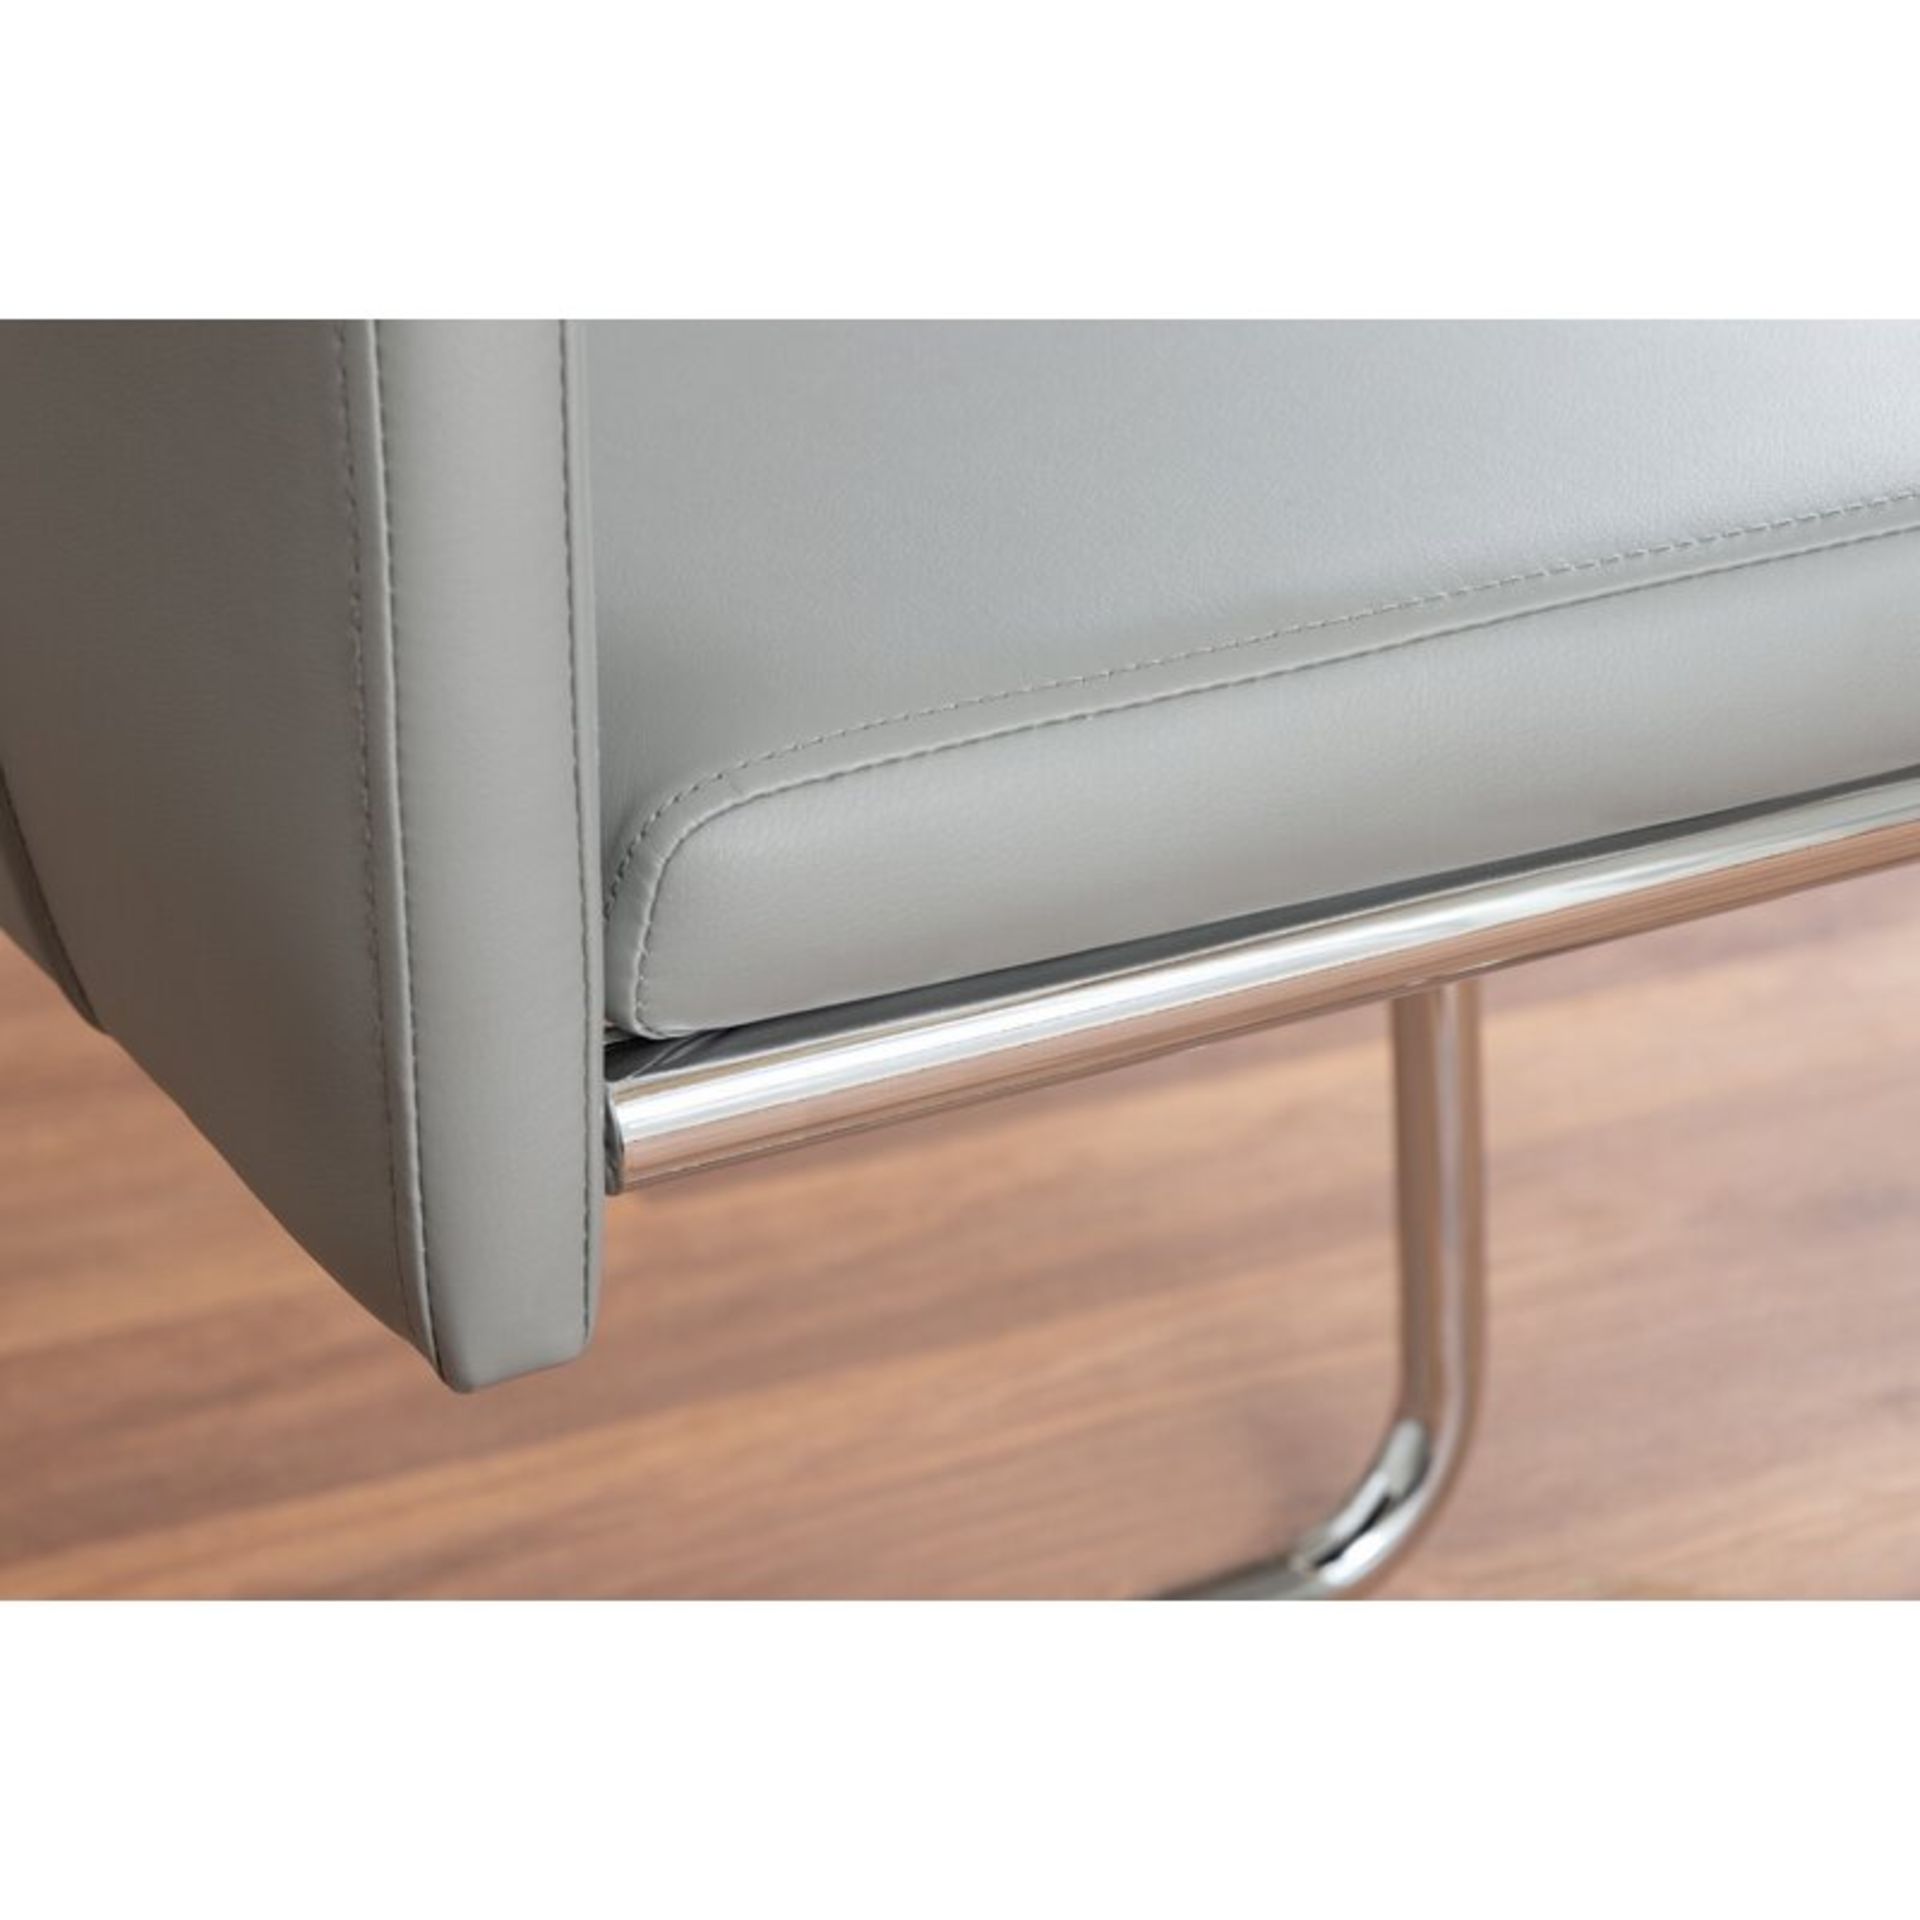 x2 Eubanks Upholstered Dining Chair RRP £179.99. - Image 3 of 4